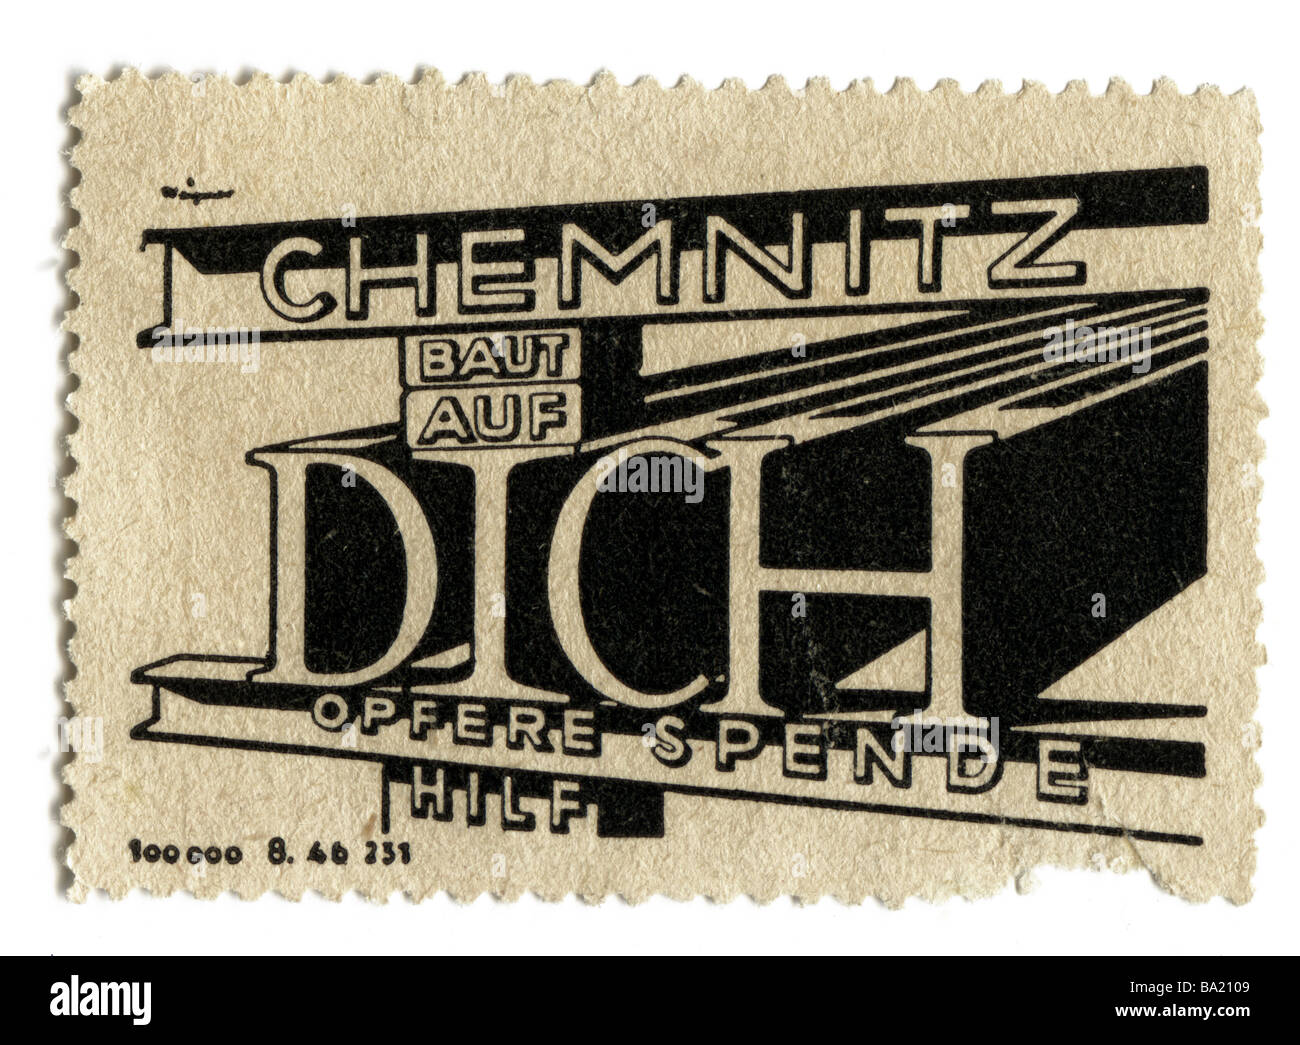 advertising, stamps, Chemnitz baut auf dich (Chemnitz trust in you), Germany, 20th century, historic, historical, trade, collecting stamp, clipping, advertisment, building industry, steel beam, Stock Photo